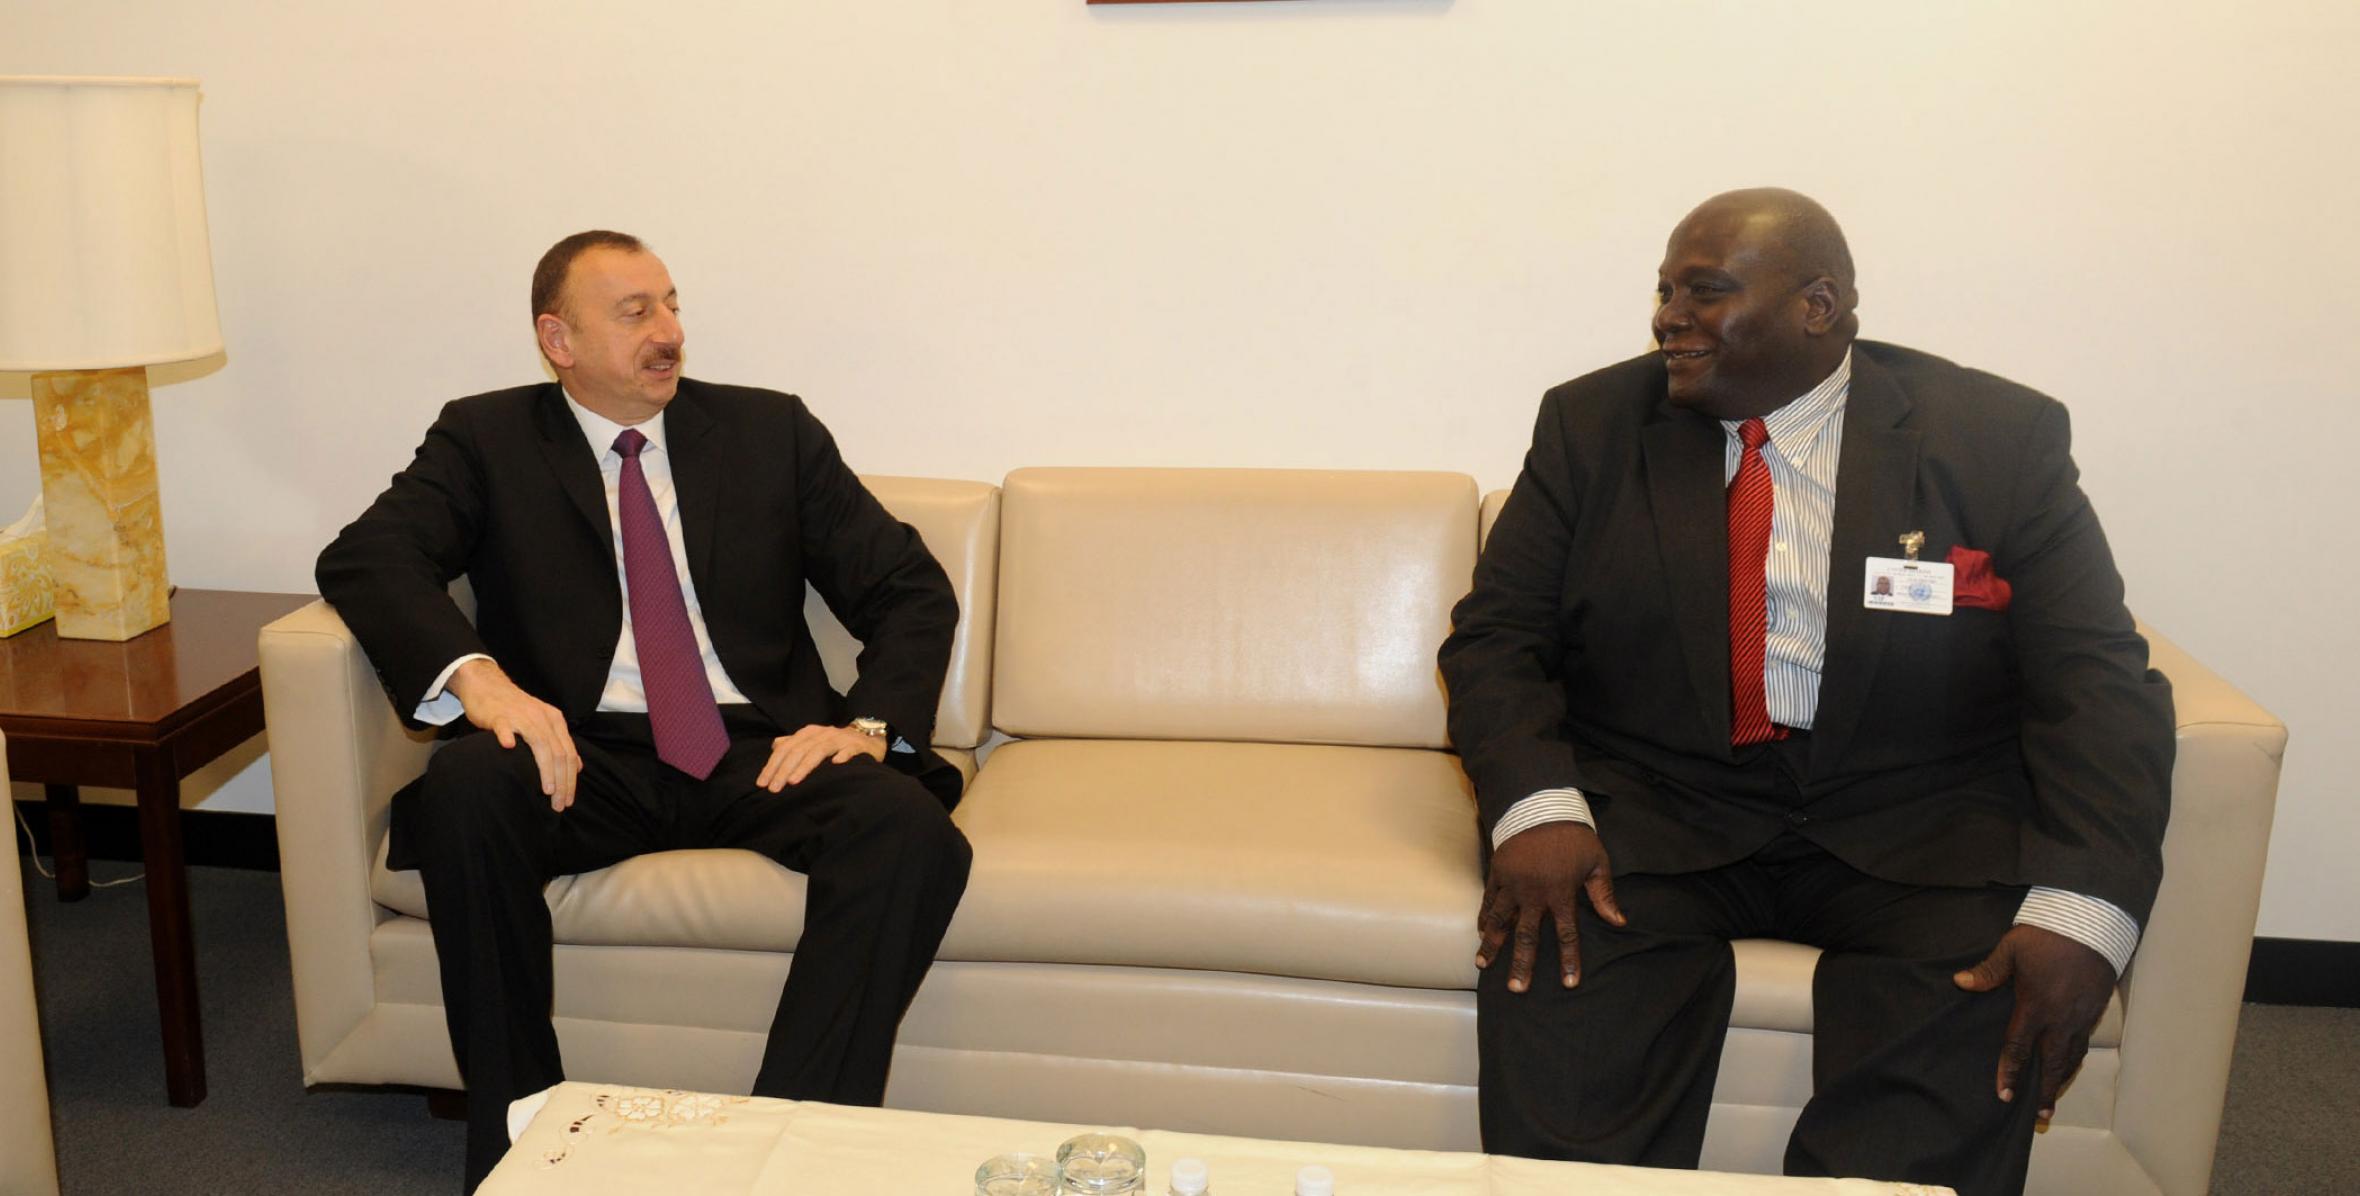 Ilham Aliyev met with Minister of Foreign Affairs and Cooperation of Togo Elliott Ohin